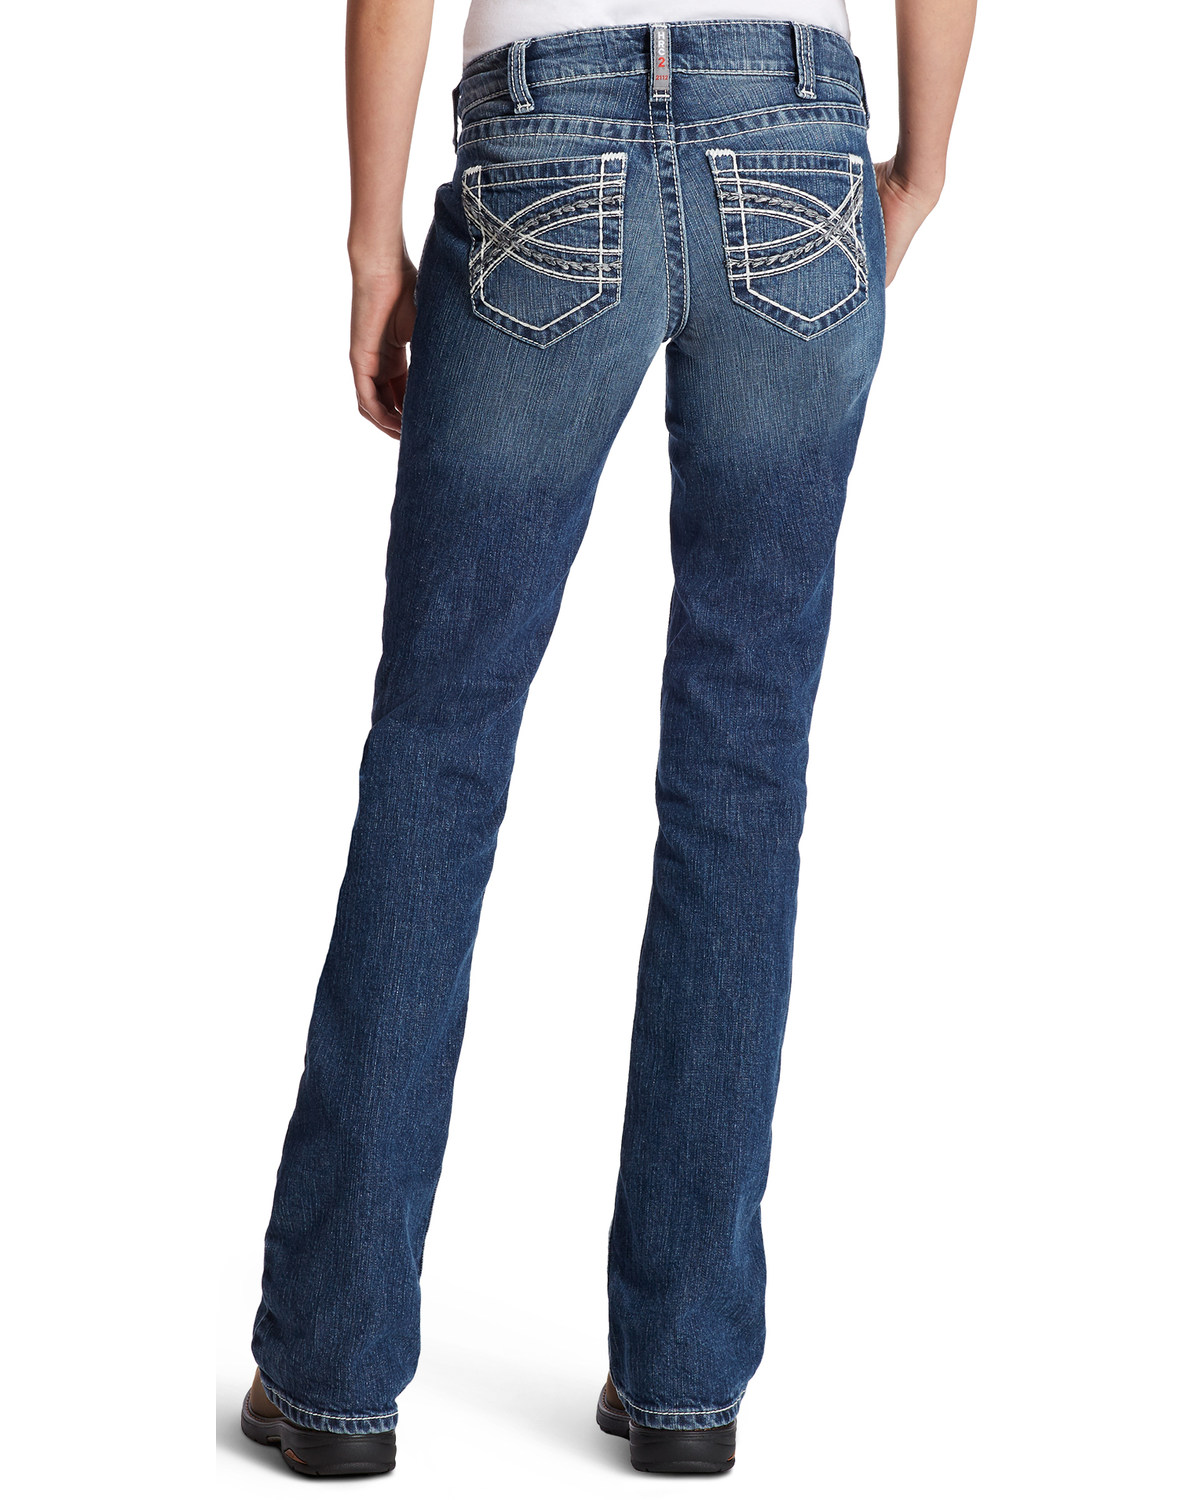 Ariat Women's FR Entwined Bootcut Jeans